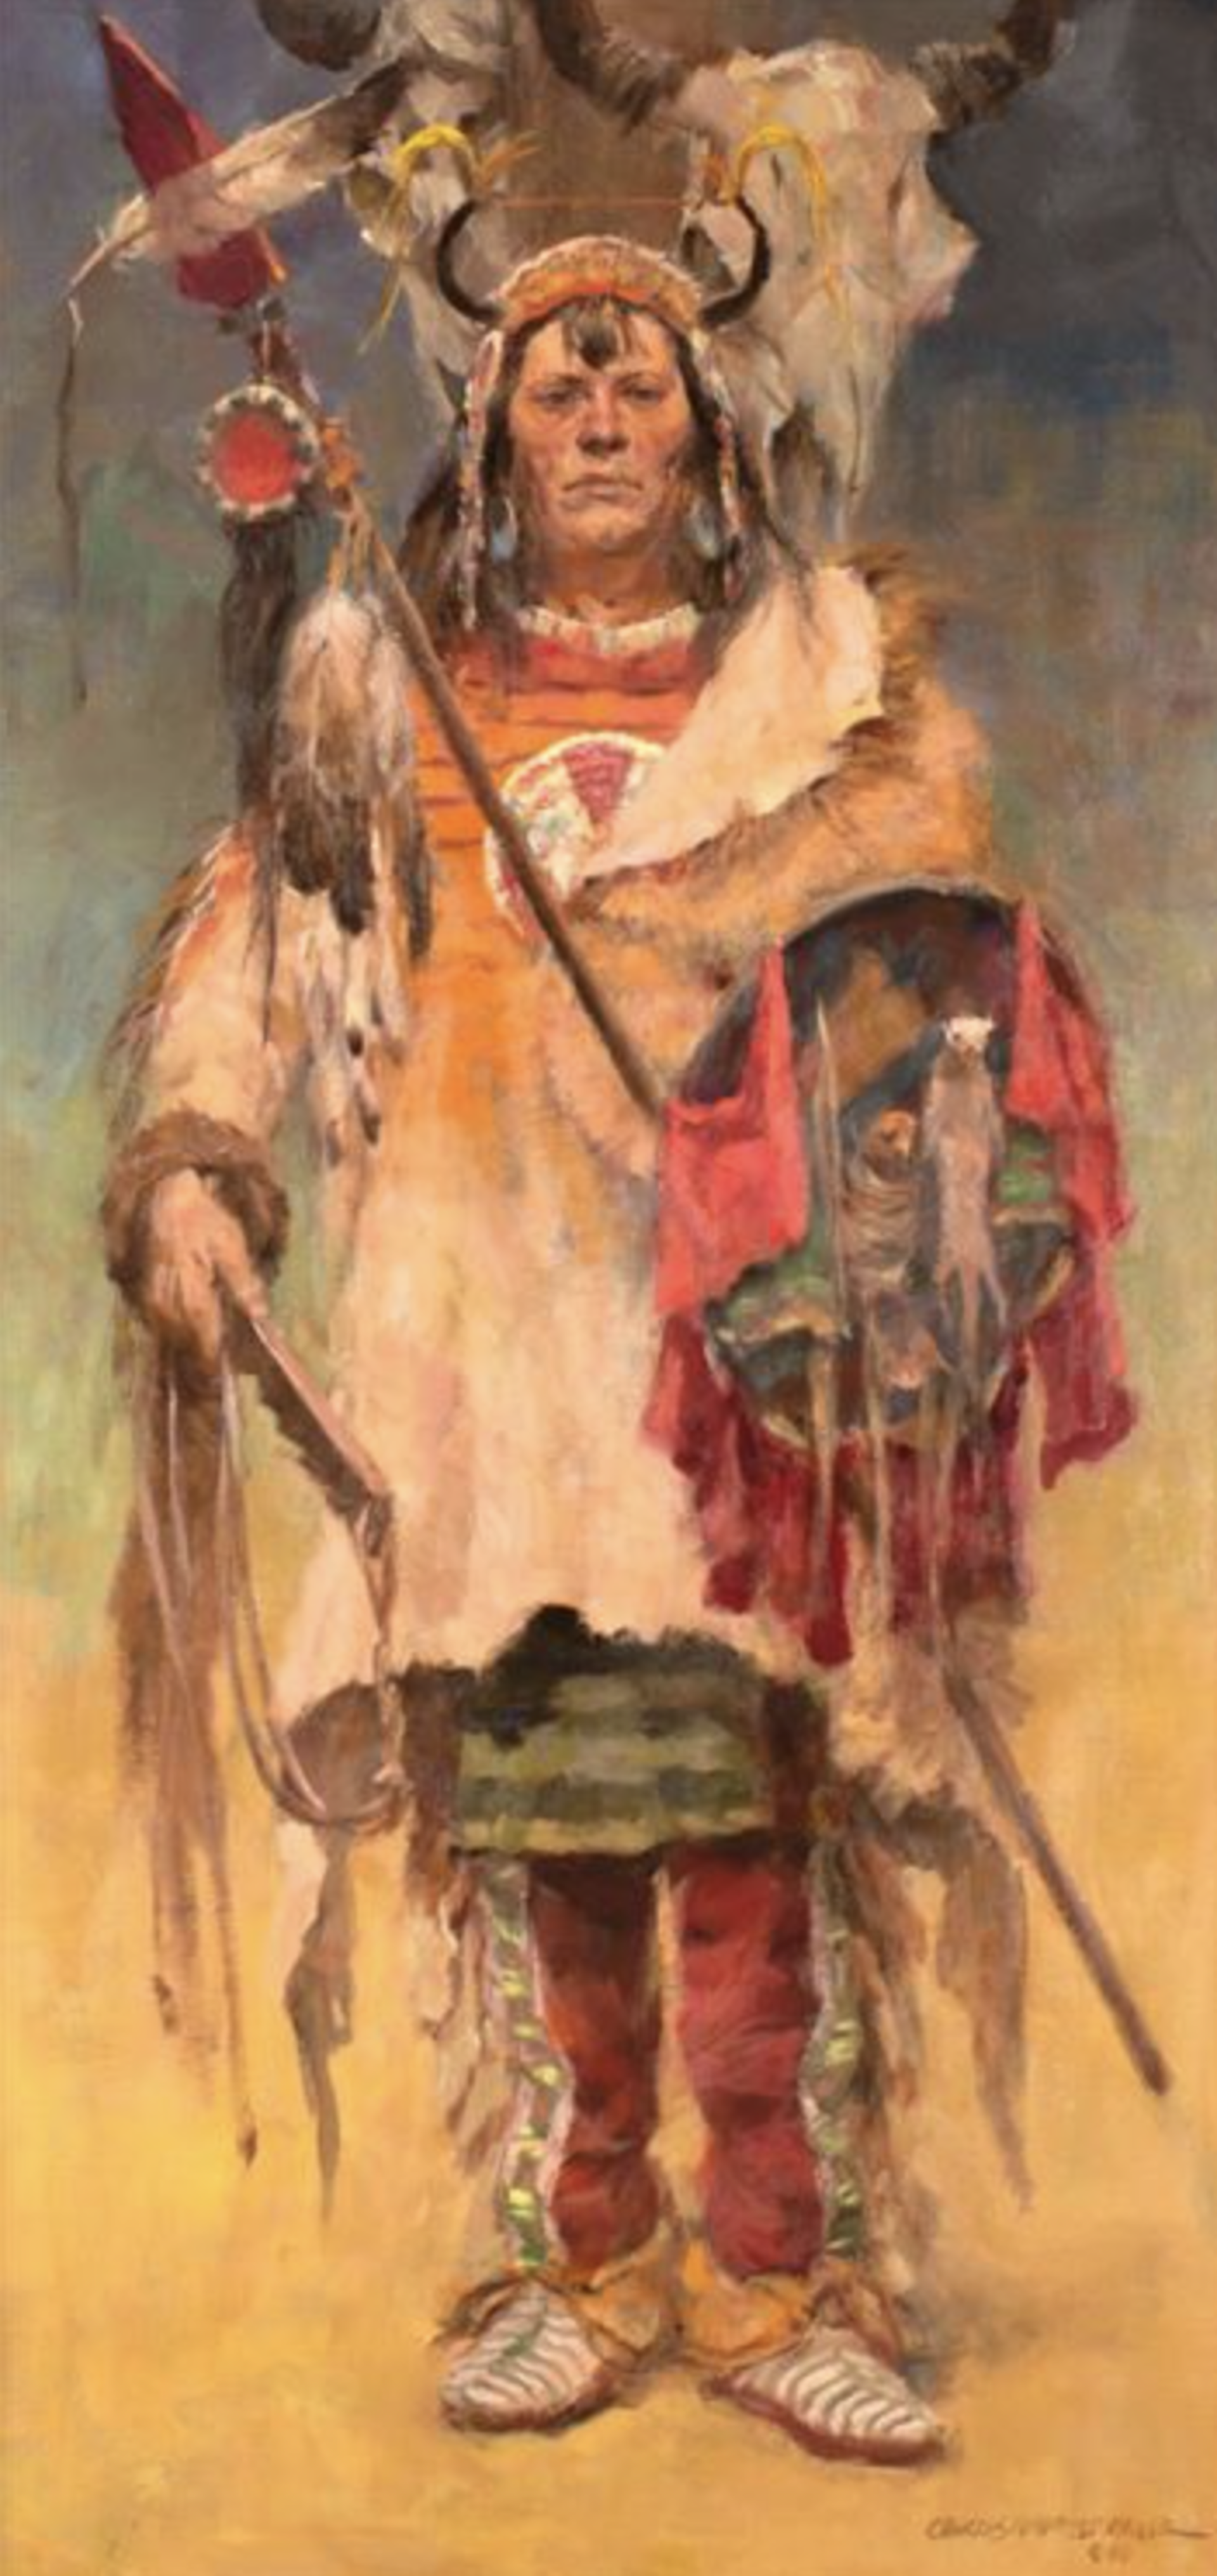 POTENTATE by Charles Winfield Miller (1922 - 1995)